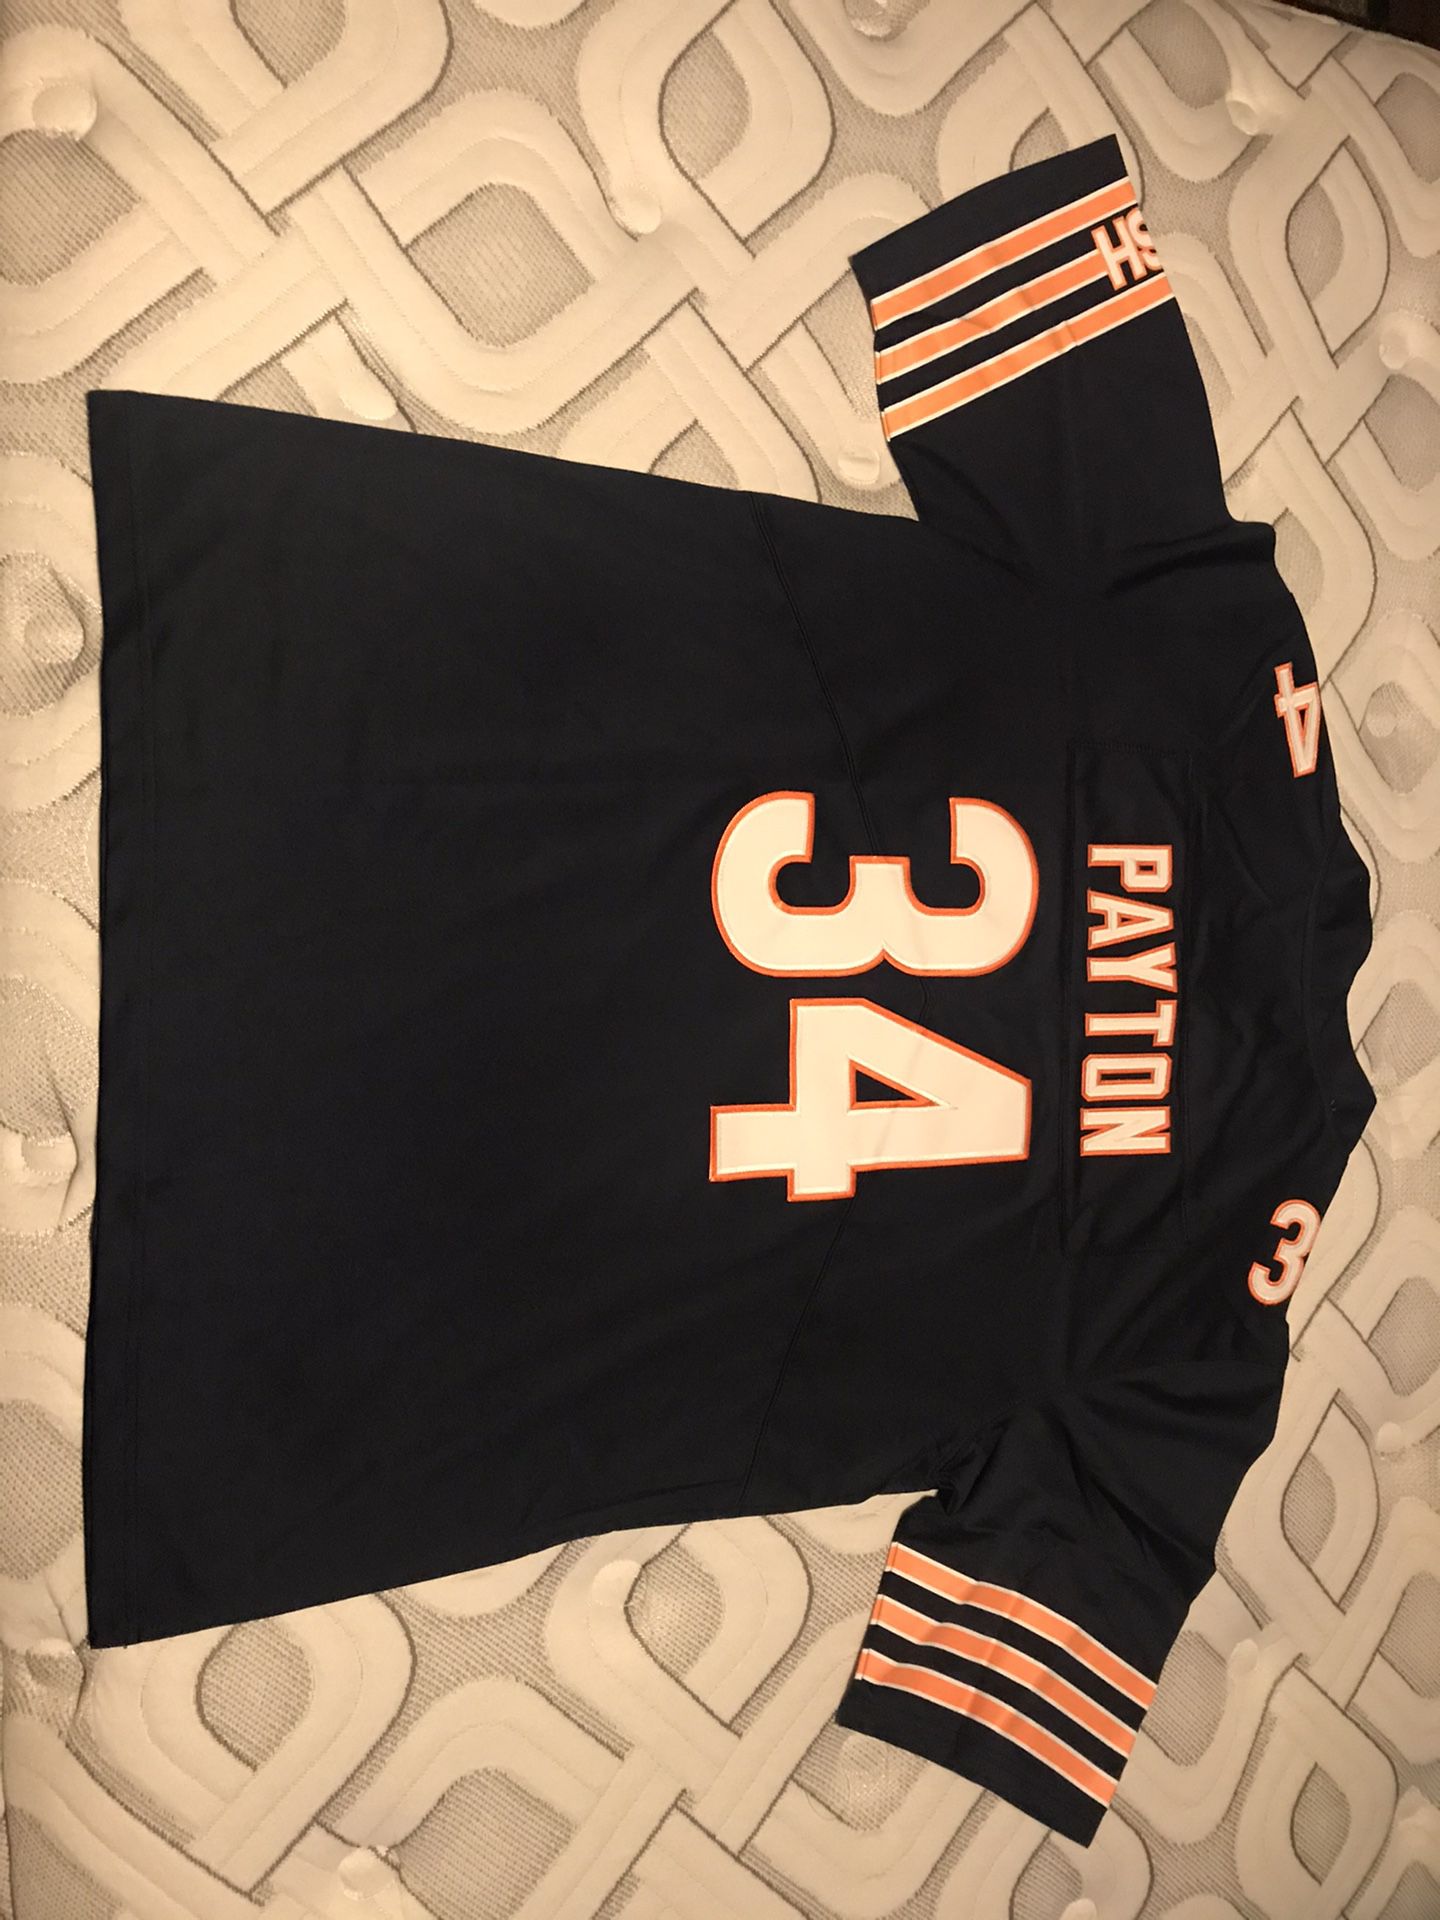 NFL Jersey New Never Used!